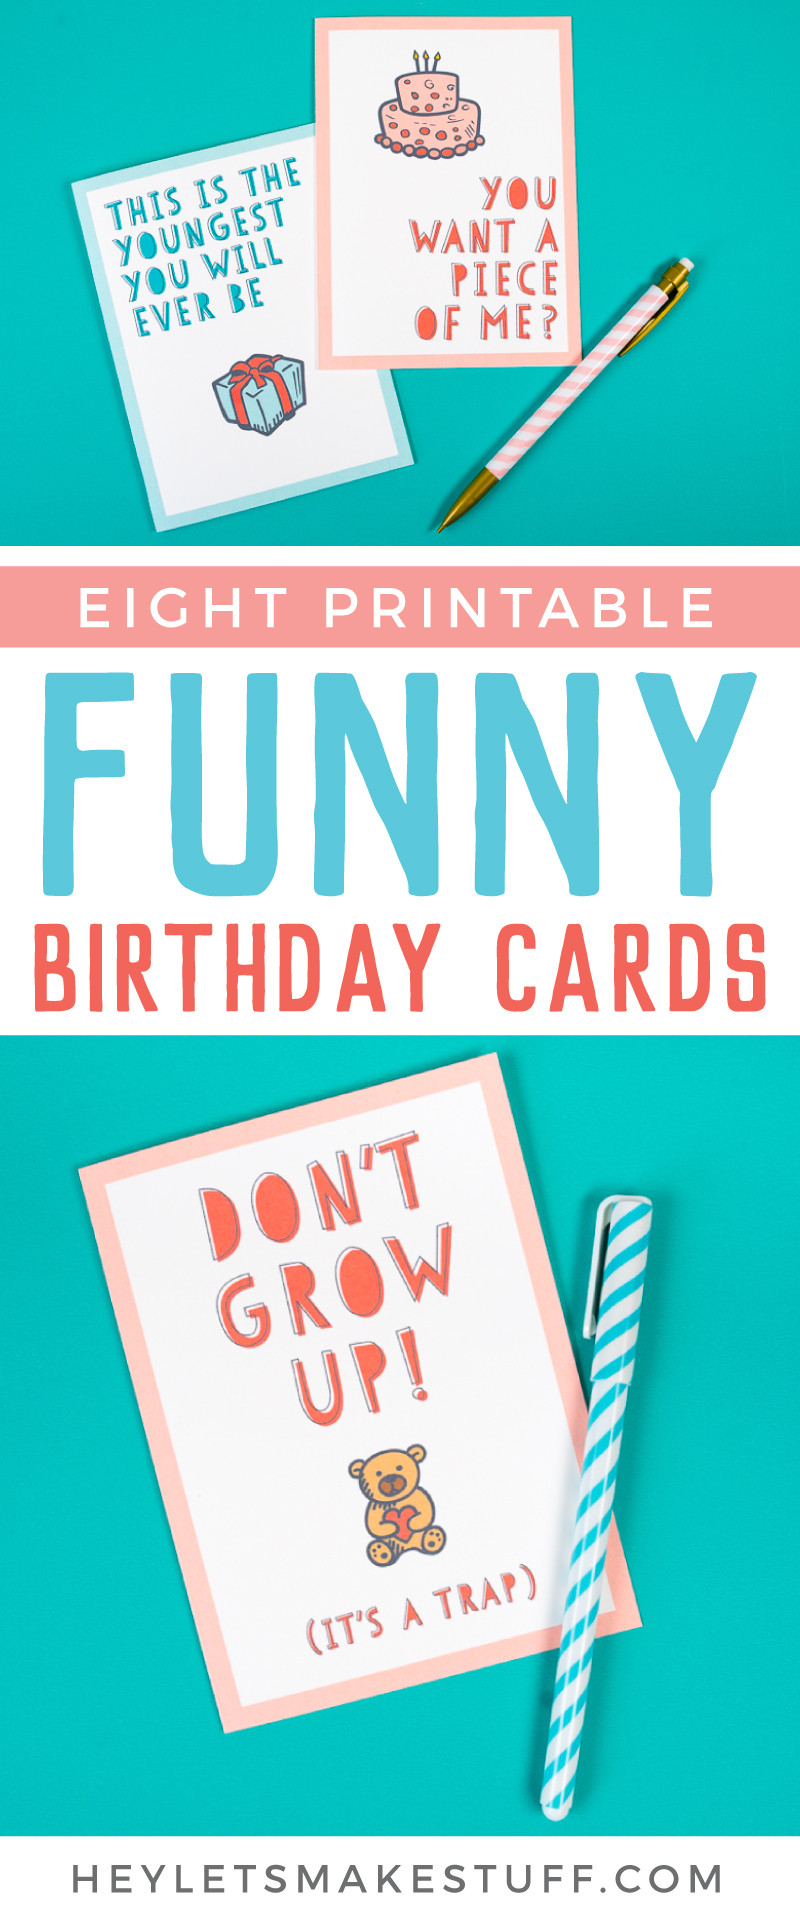 Free Online Funny Birthday Cards
 Free Funny Printable Birthday Cards for Adults Eight